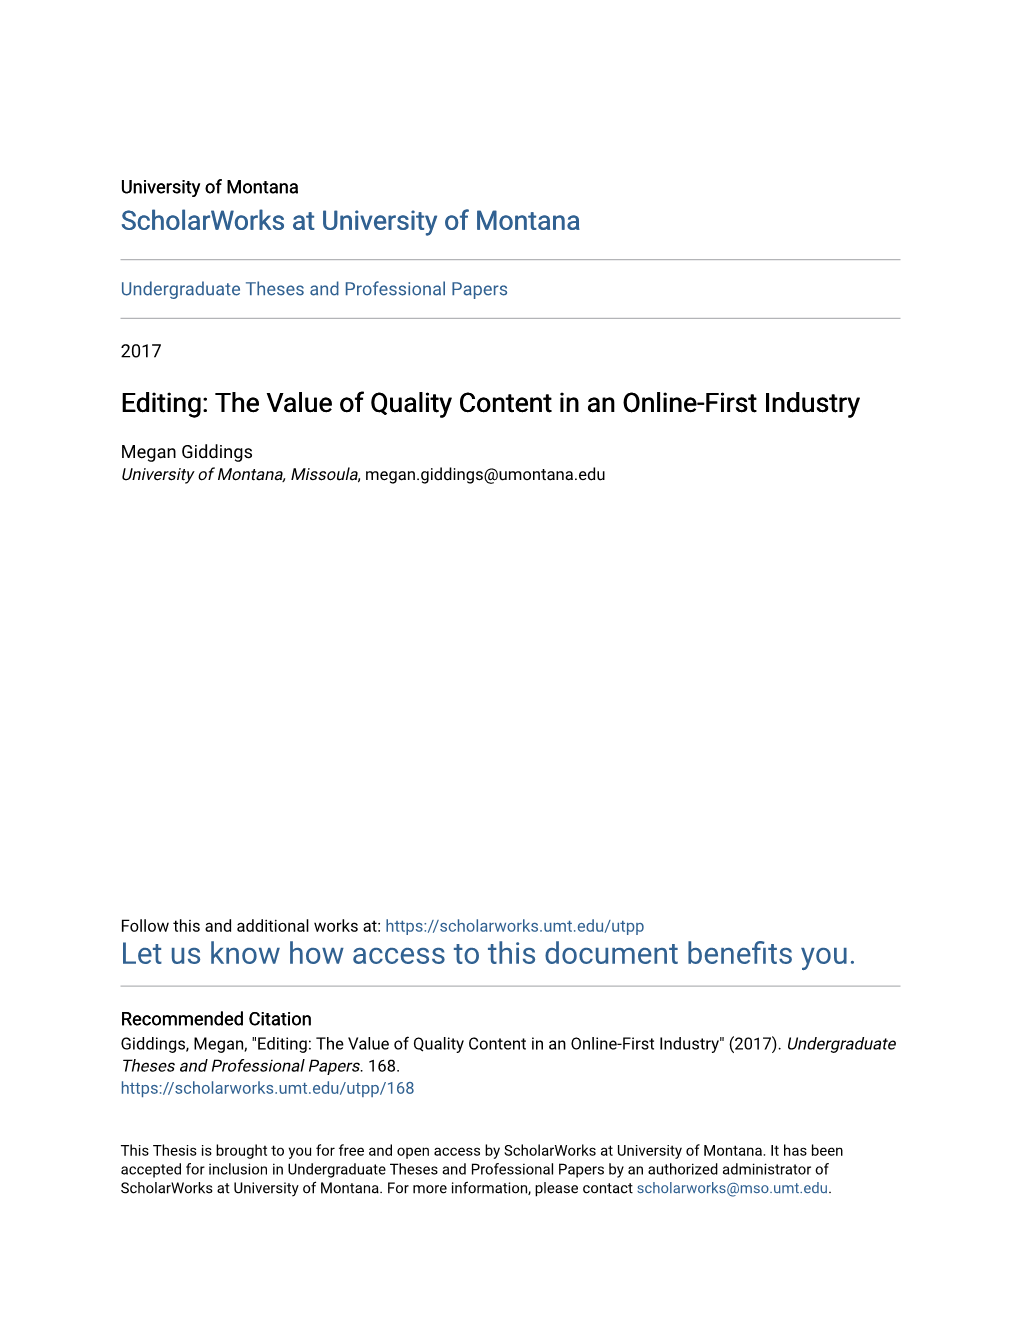 Editing: the Value of Quality Content in an Online-First Industry